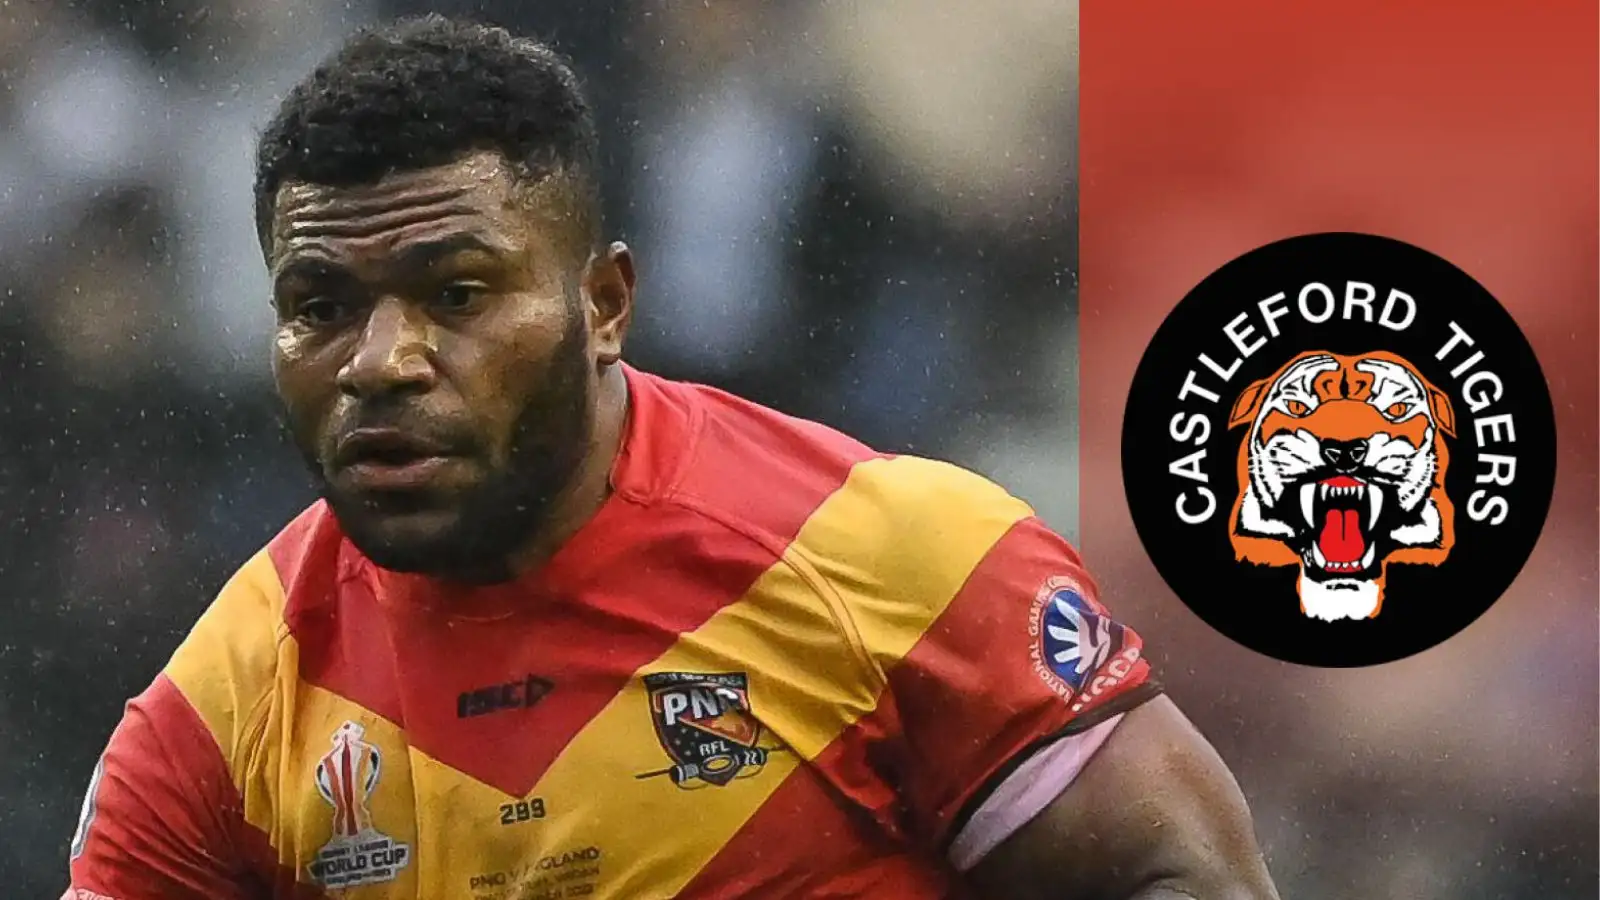 Castleford Tigers coach confirms interest in another Papua New Guinea star: ‘Definitely on the radar’